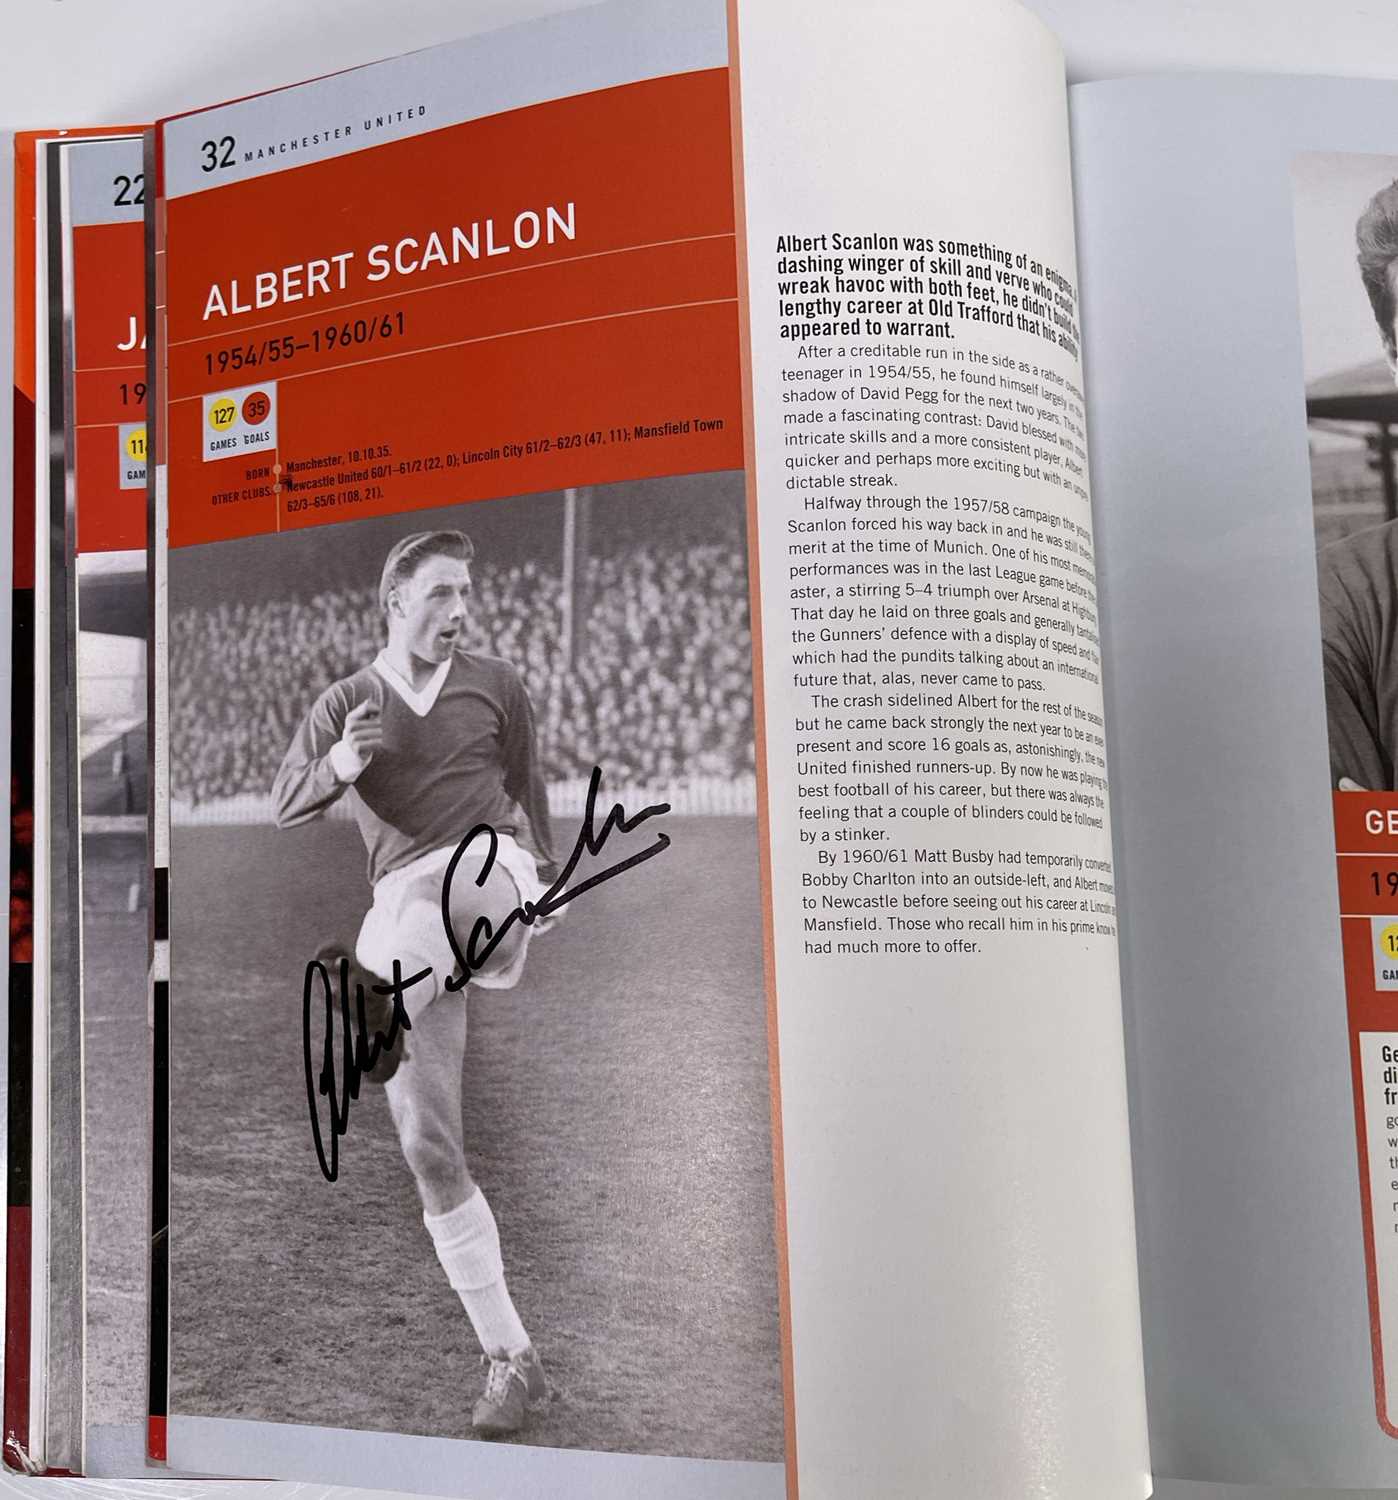 FOOTBALL MEMORABILIA - MANCHESTER UNITED - MULTI SIGNED PLAYER BY PLAYER BOOK. - Image 6 of 35